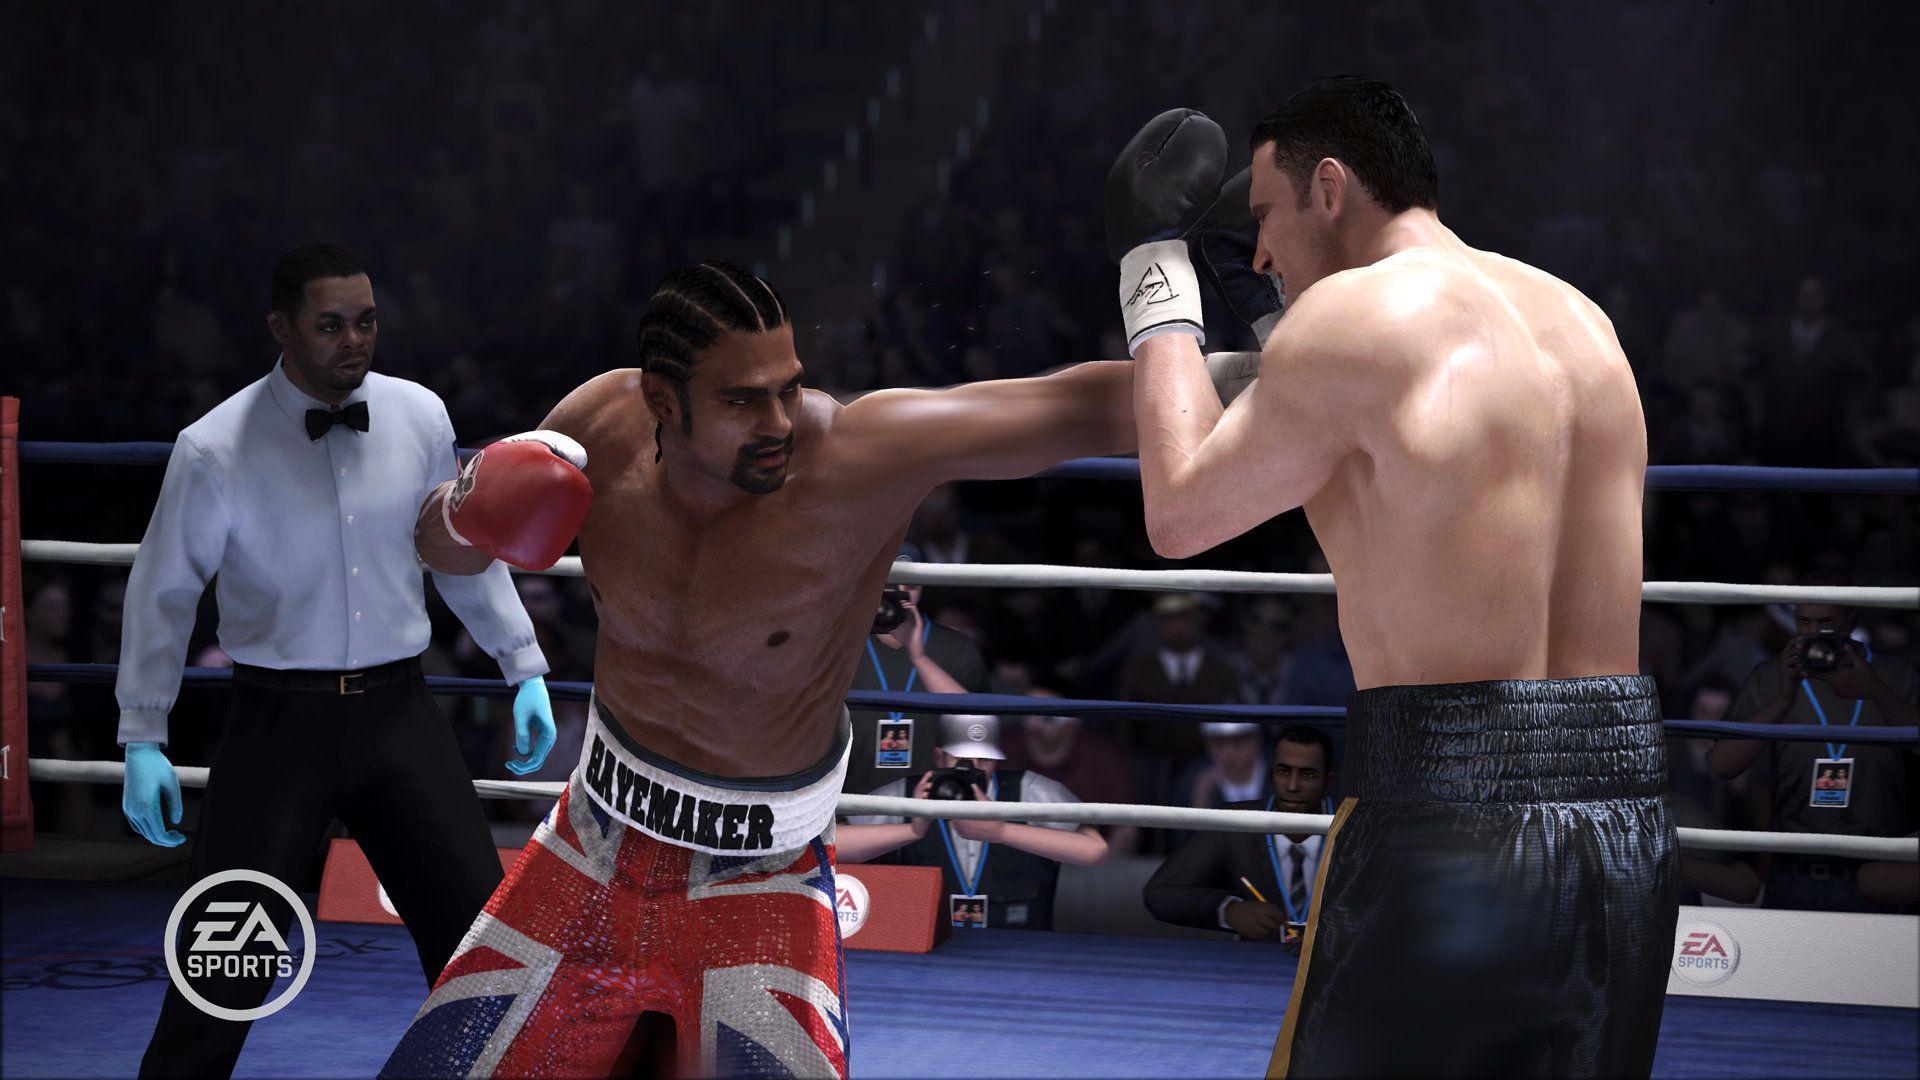 how to play fight night champion disk on pc